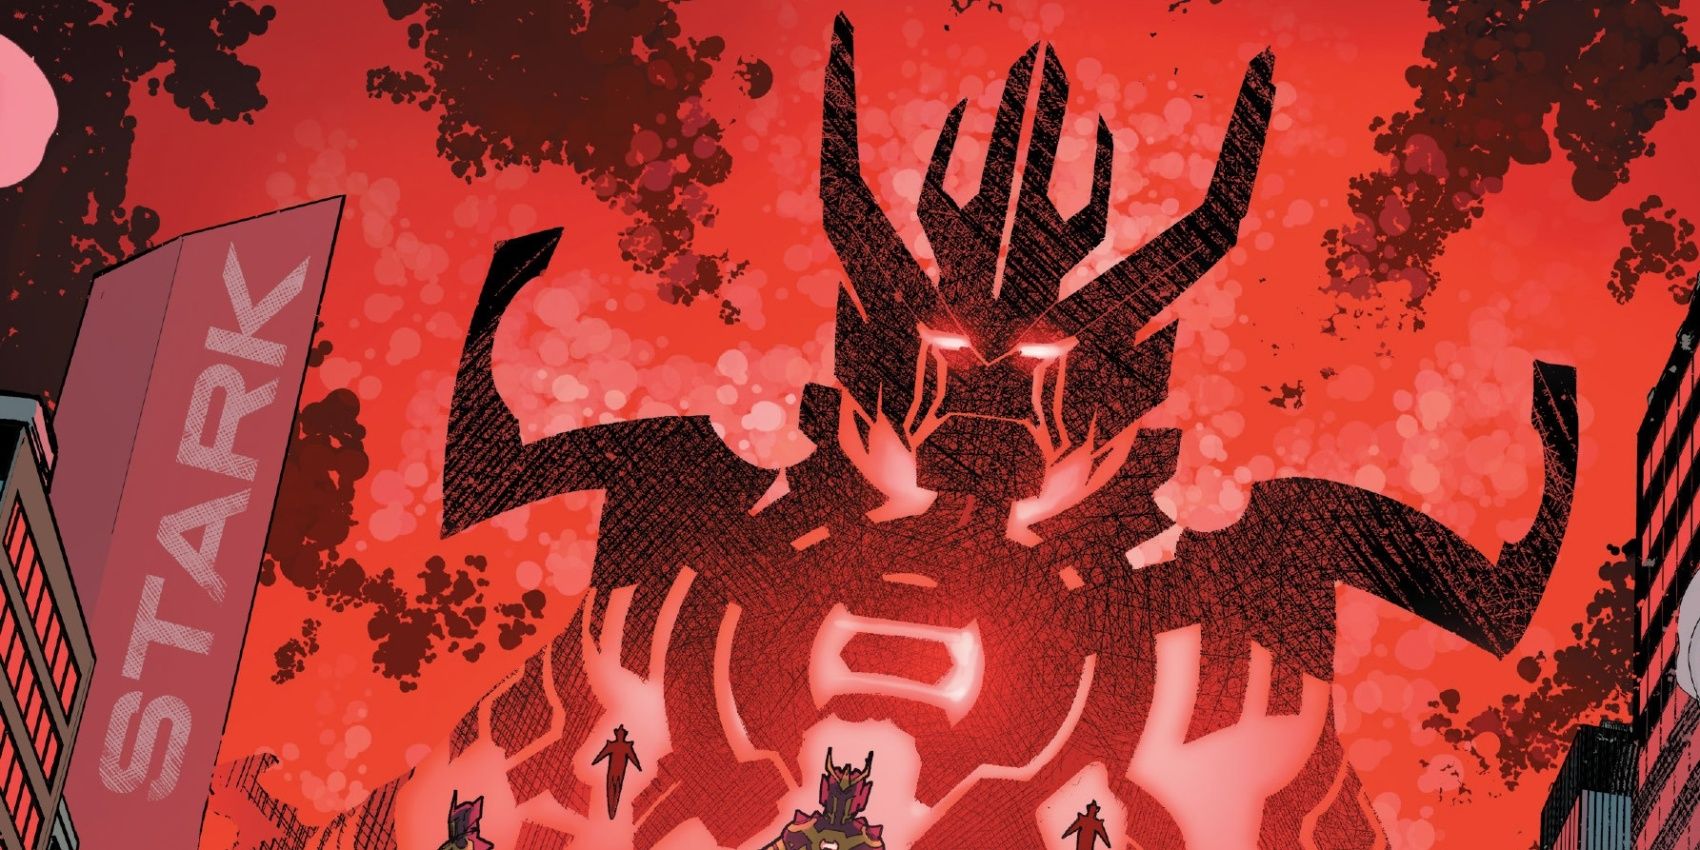 The Celestial Destructor from Marvel Comics descends from the sky, emitting a red glow.